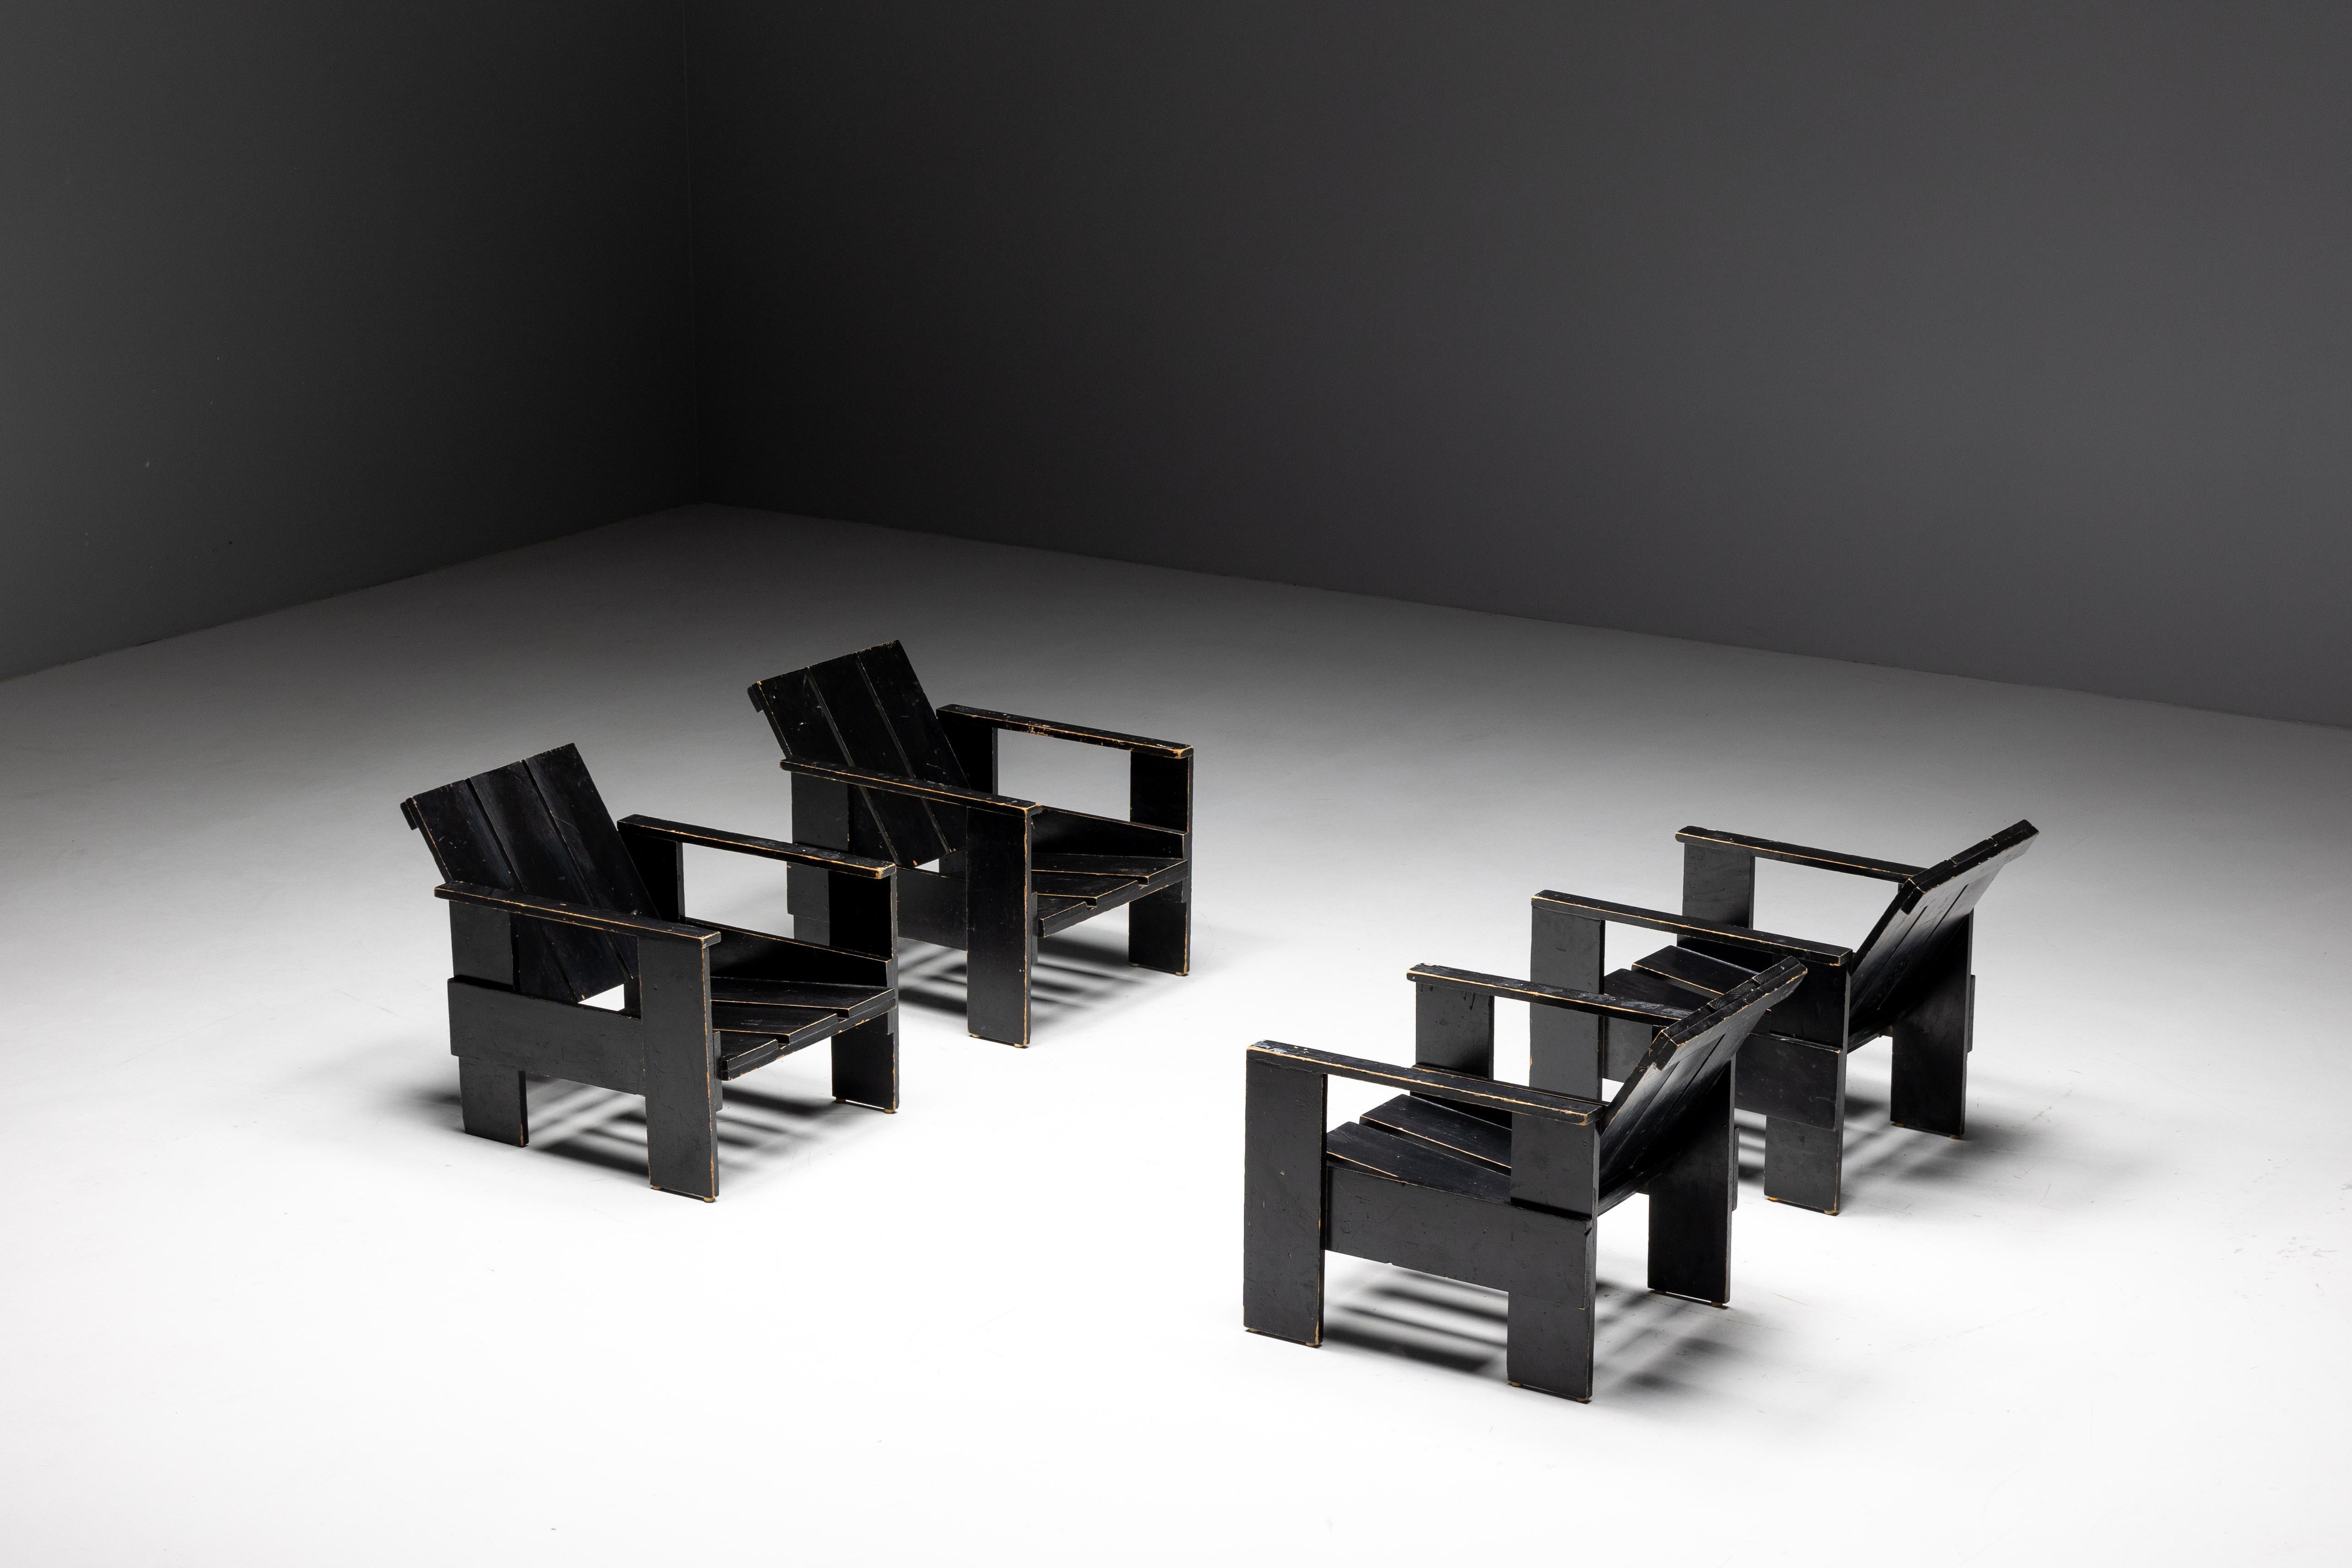 Black crate chairs by Gerrit Rietveld, crafted circa 1960 in the Netherlands, these chairs are a testament to Rietveld's avant-garde approach to furniture design. As a pioneering figure in the De Stijl movement, Rietveld revolutionized the concept